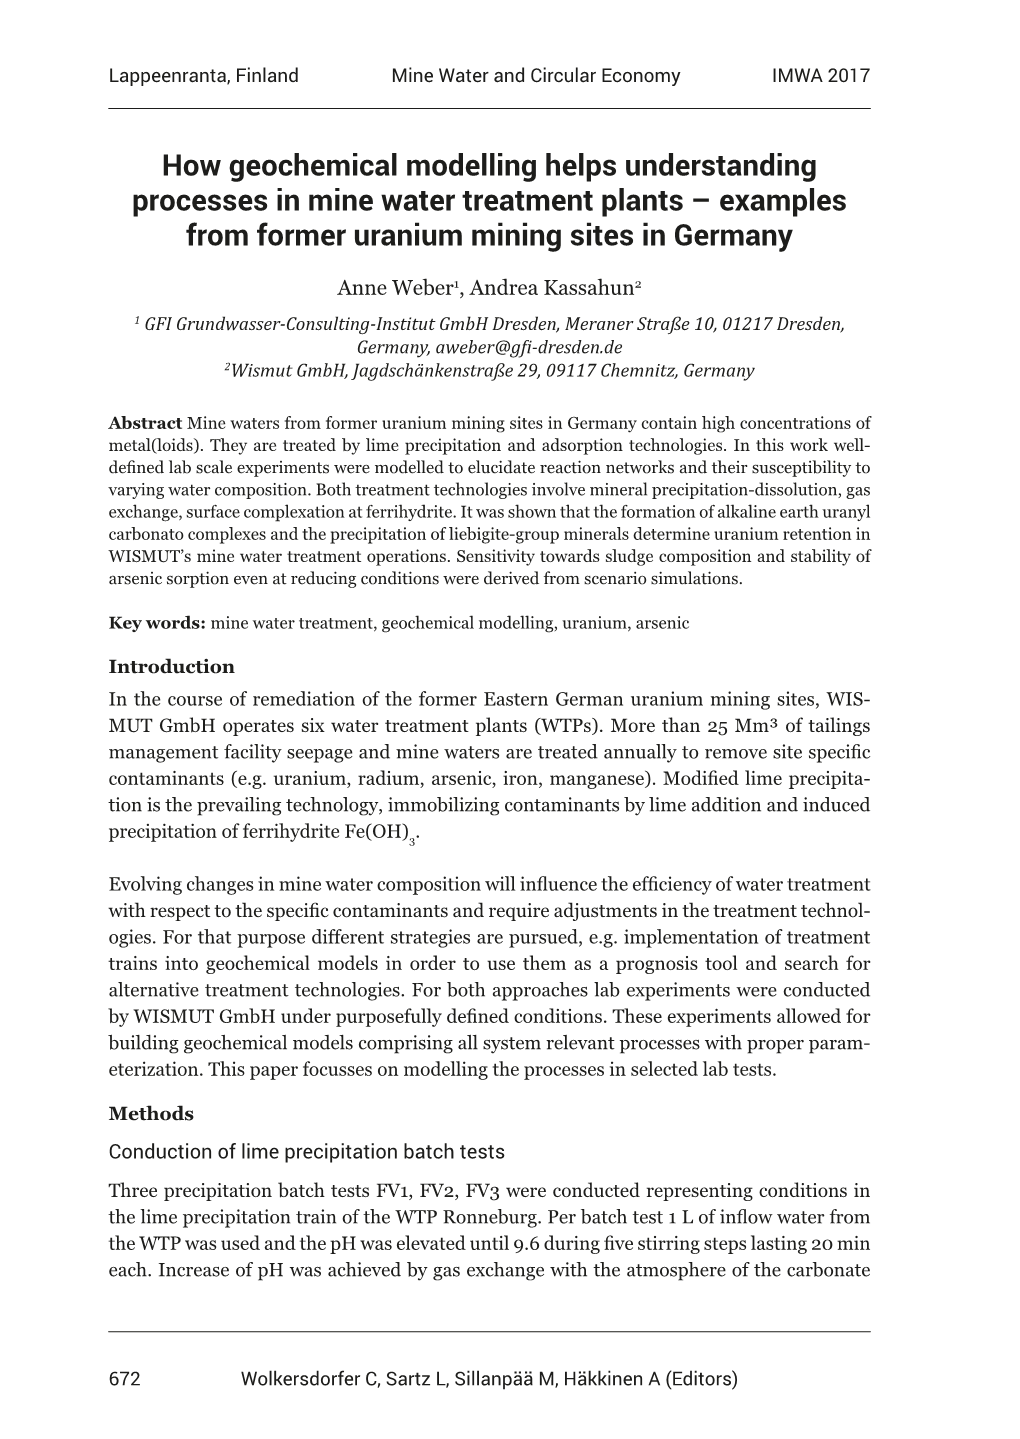 How Geochemical Modelling Helps Understanding Processes in Mine Water Treatment Plants – Examples from Former Uranium Mining Sites in Germany